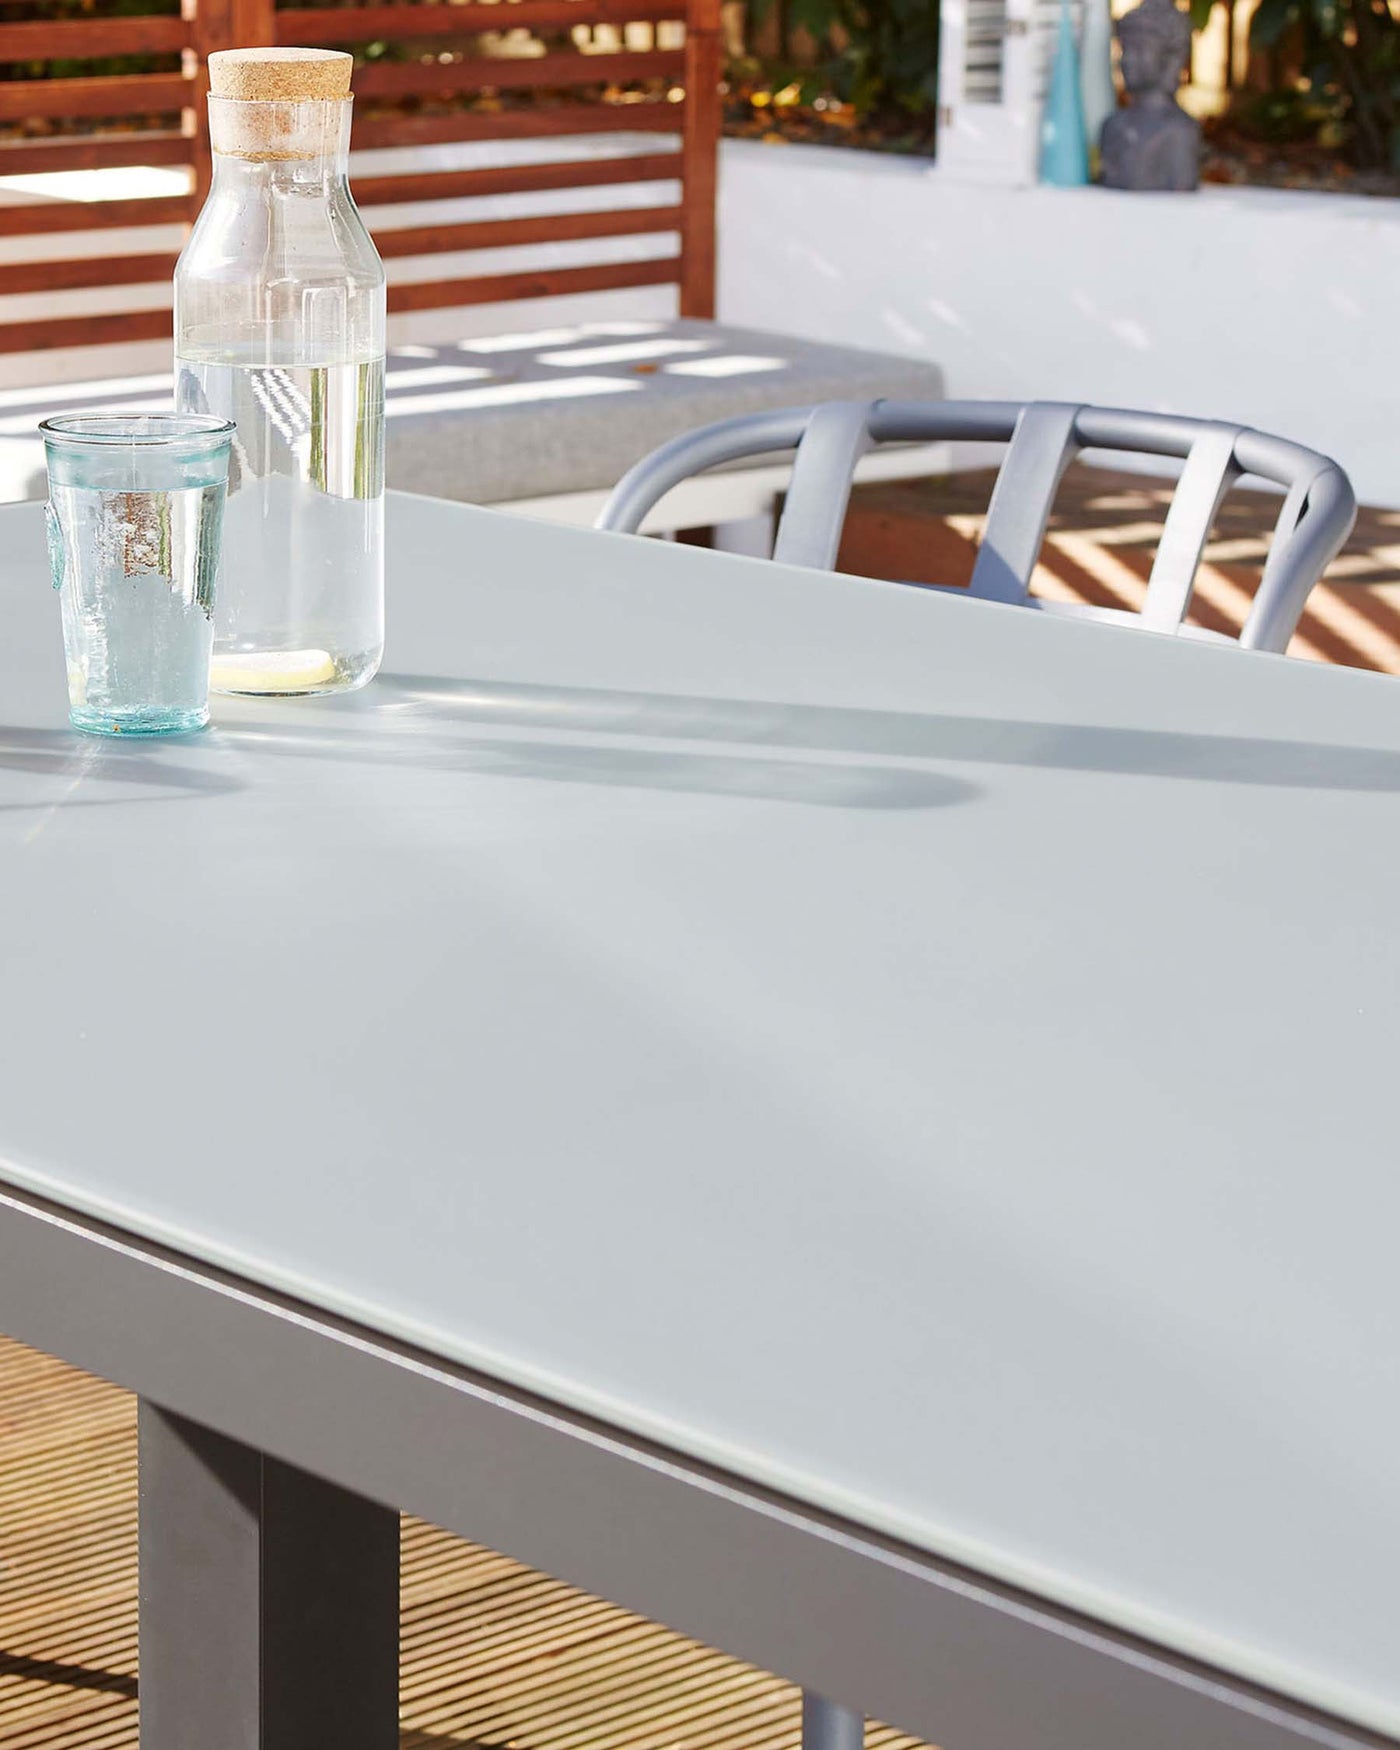 Modern outdoor furniture featuring a sleek, white rectangular table with clean lines and a smooth finish, accompanied by a stylish grey aluminium chair with a minimalist curved backrest.